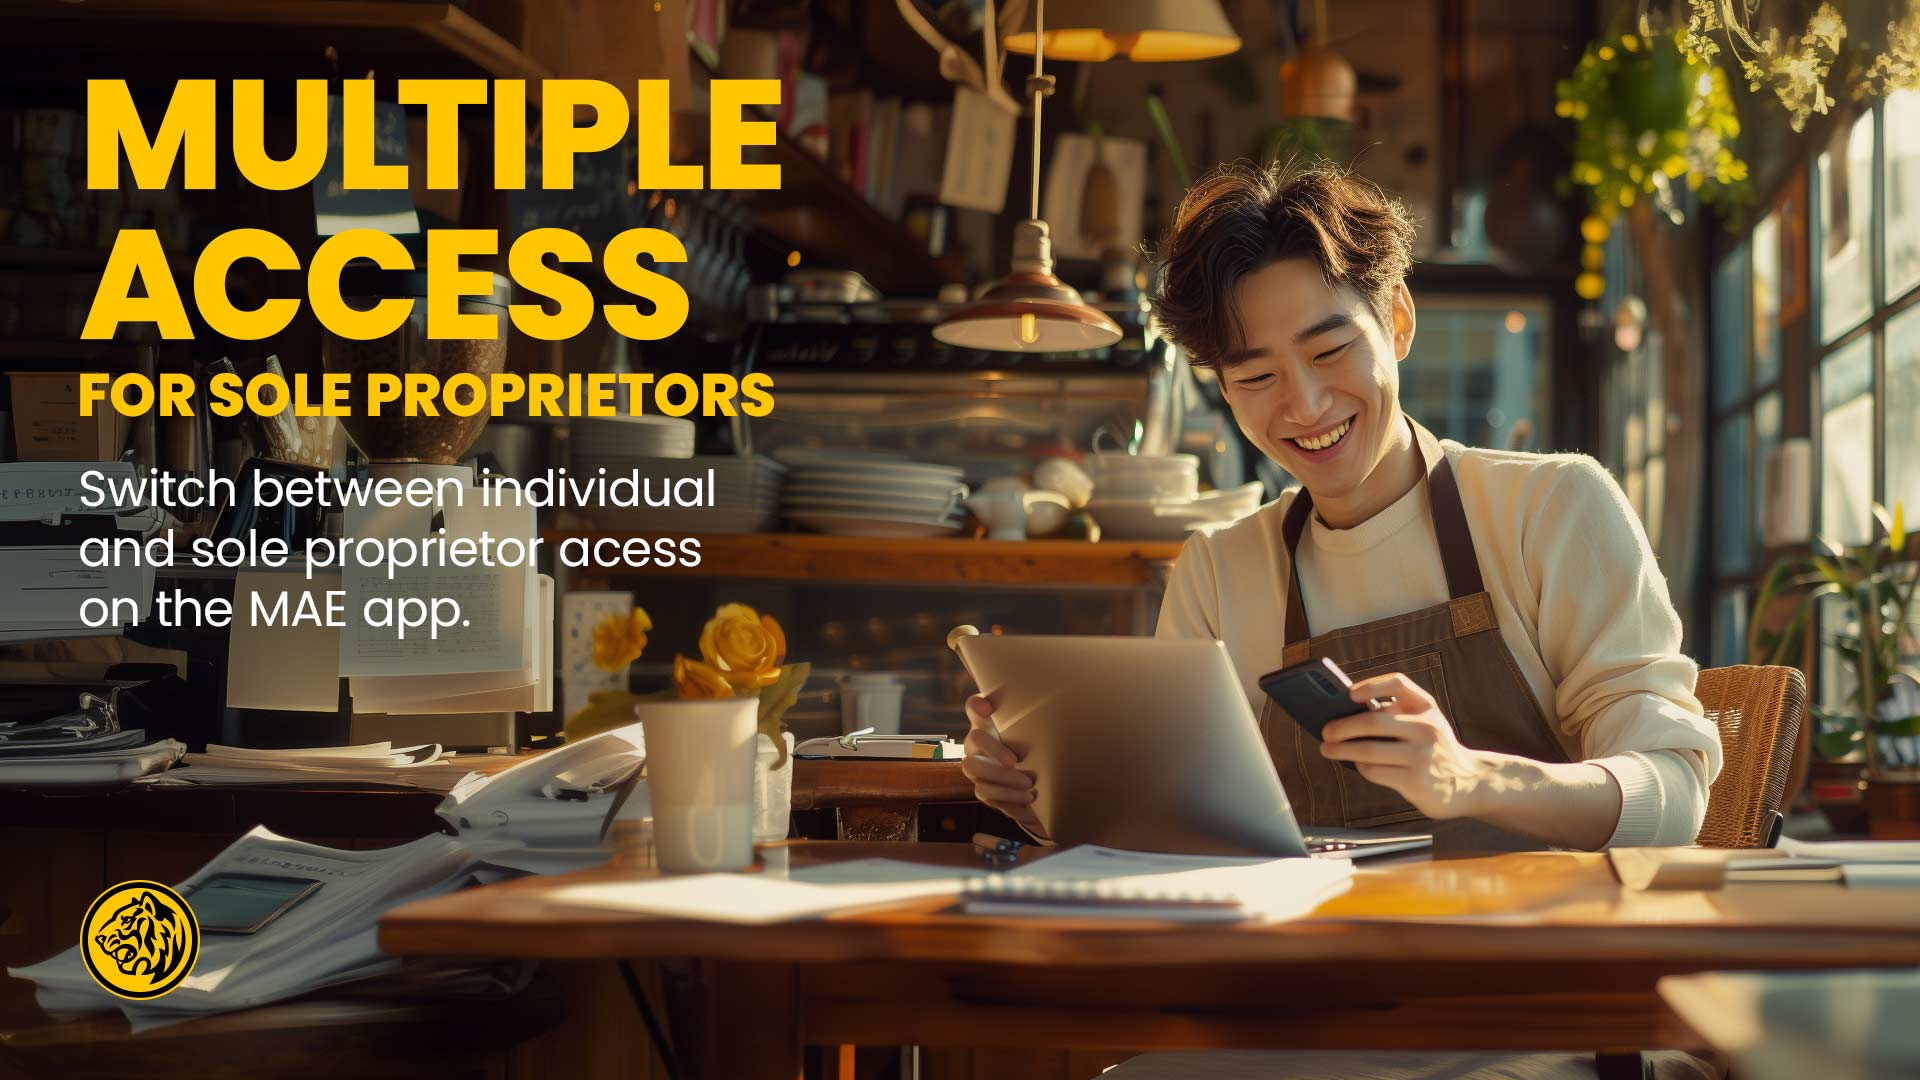 Maybank introduces Single Device Access – linking up to five accounts via the MAE app